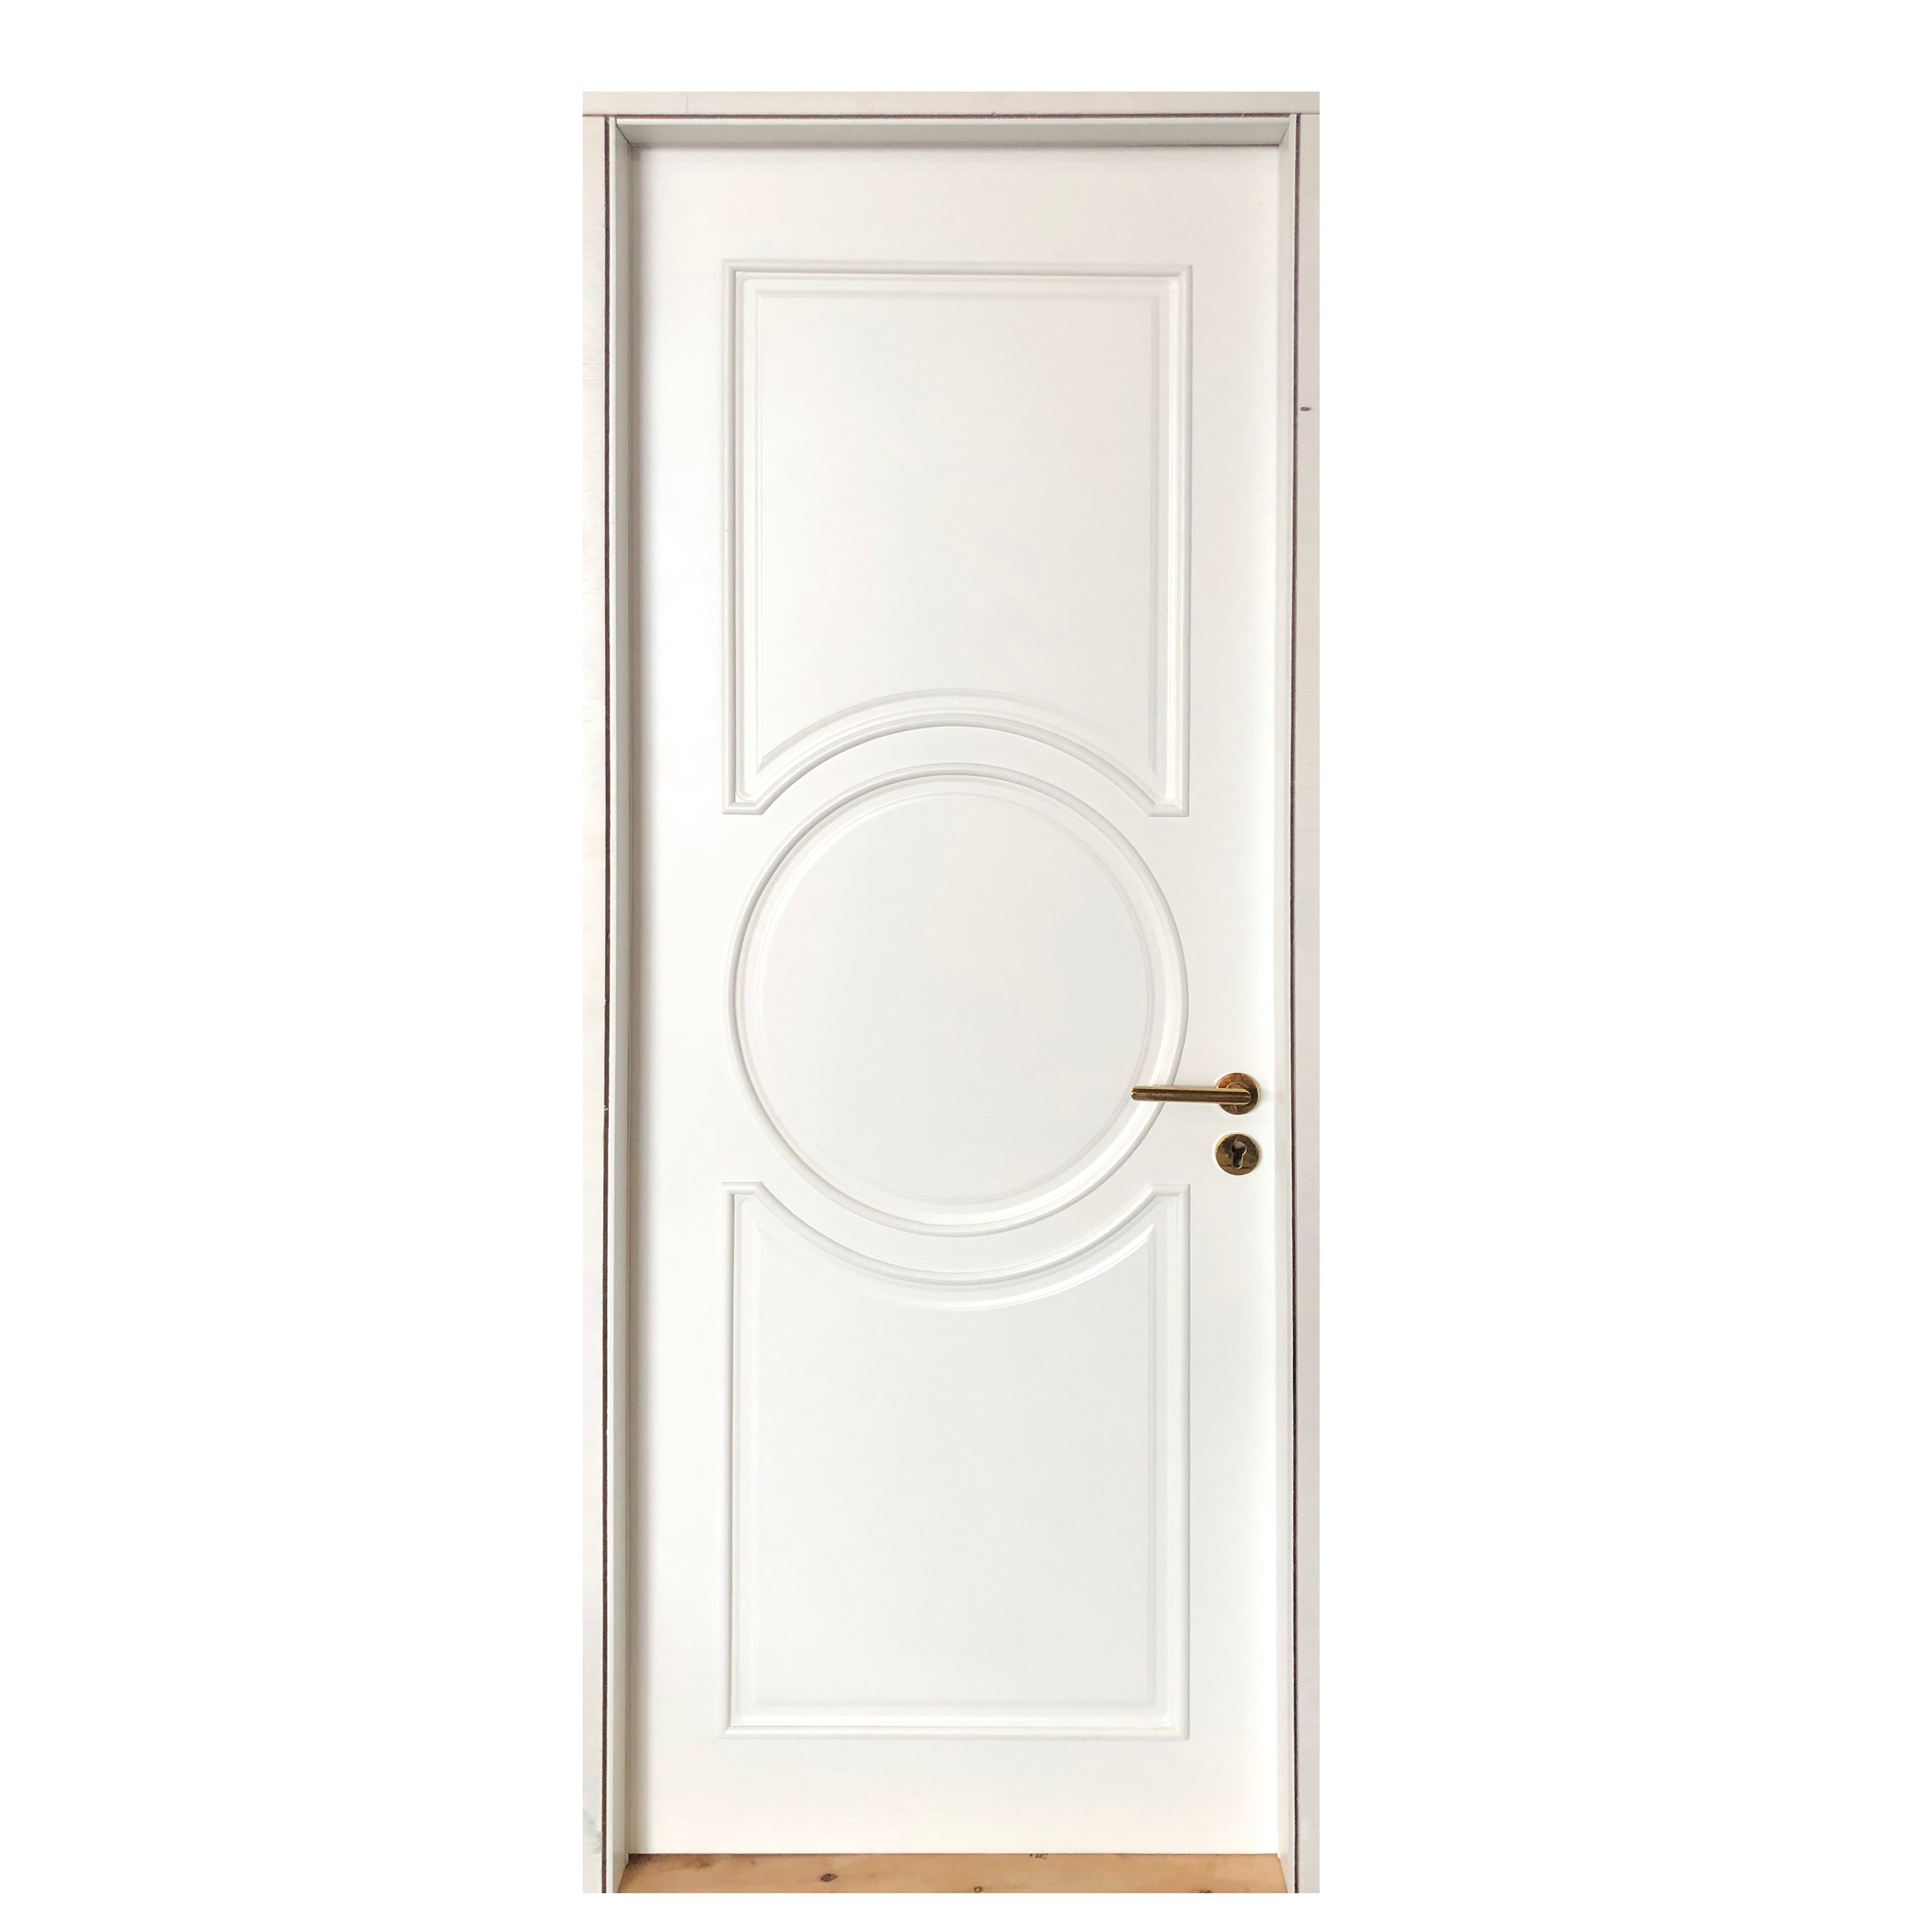 Prettywood Traditional White Color Prehung Design Solid Wooden Interior Room Doors